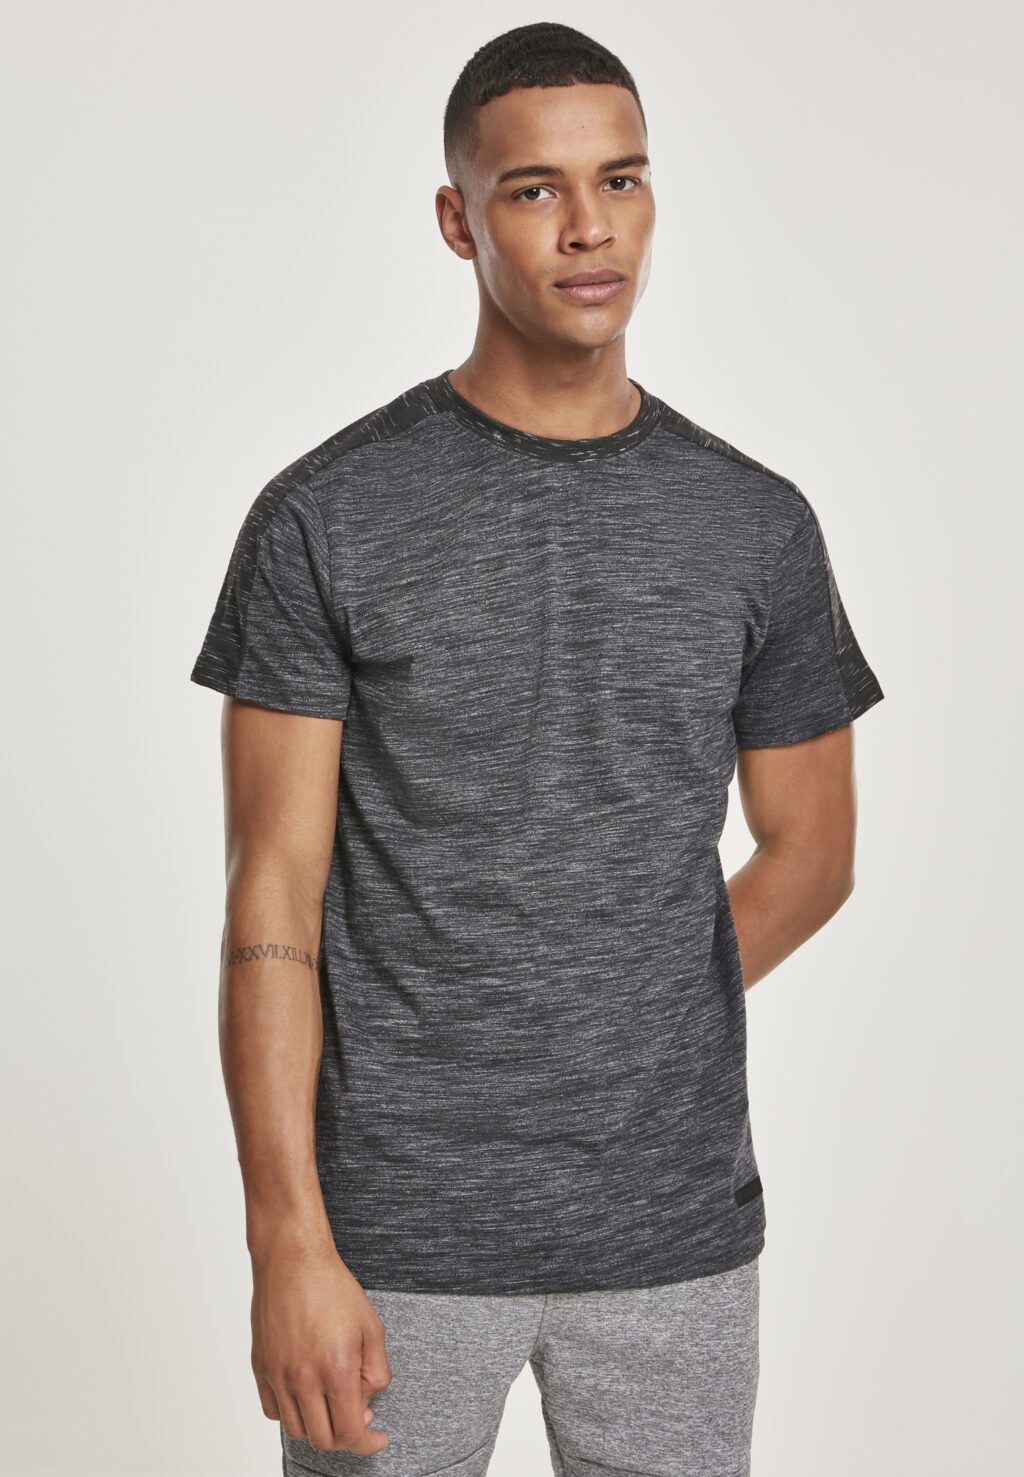 Shoulder Panel Tech Tee marled charcoal SP1412